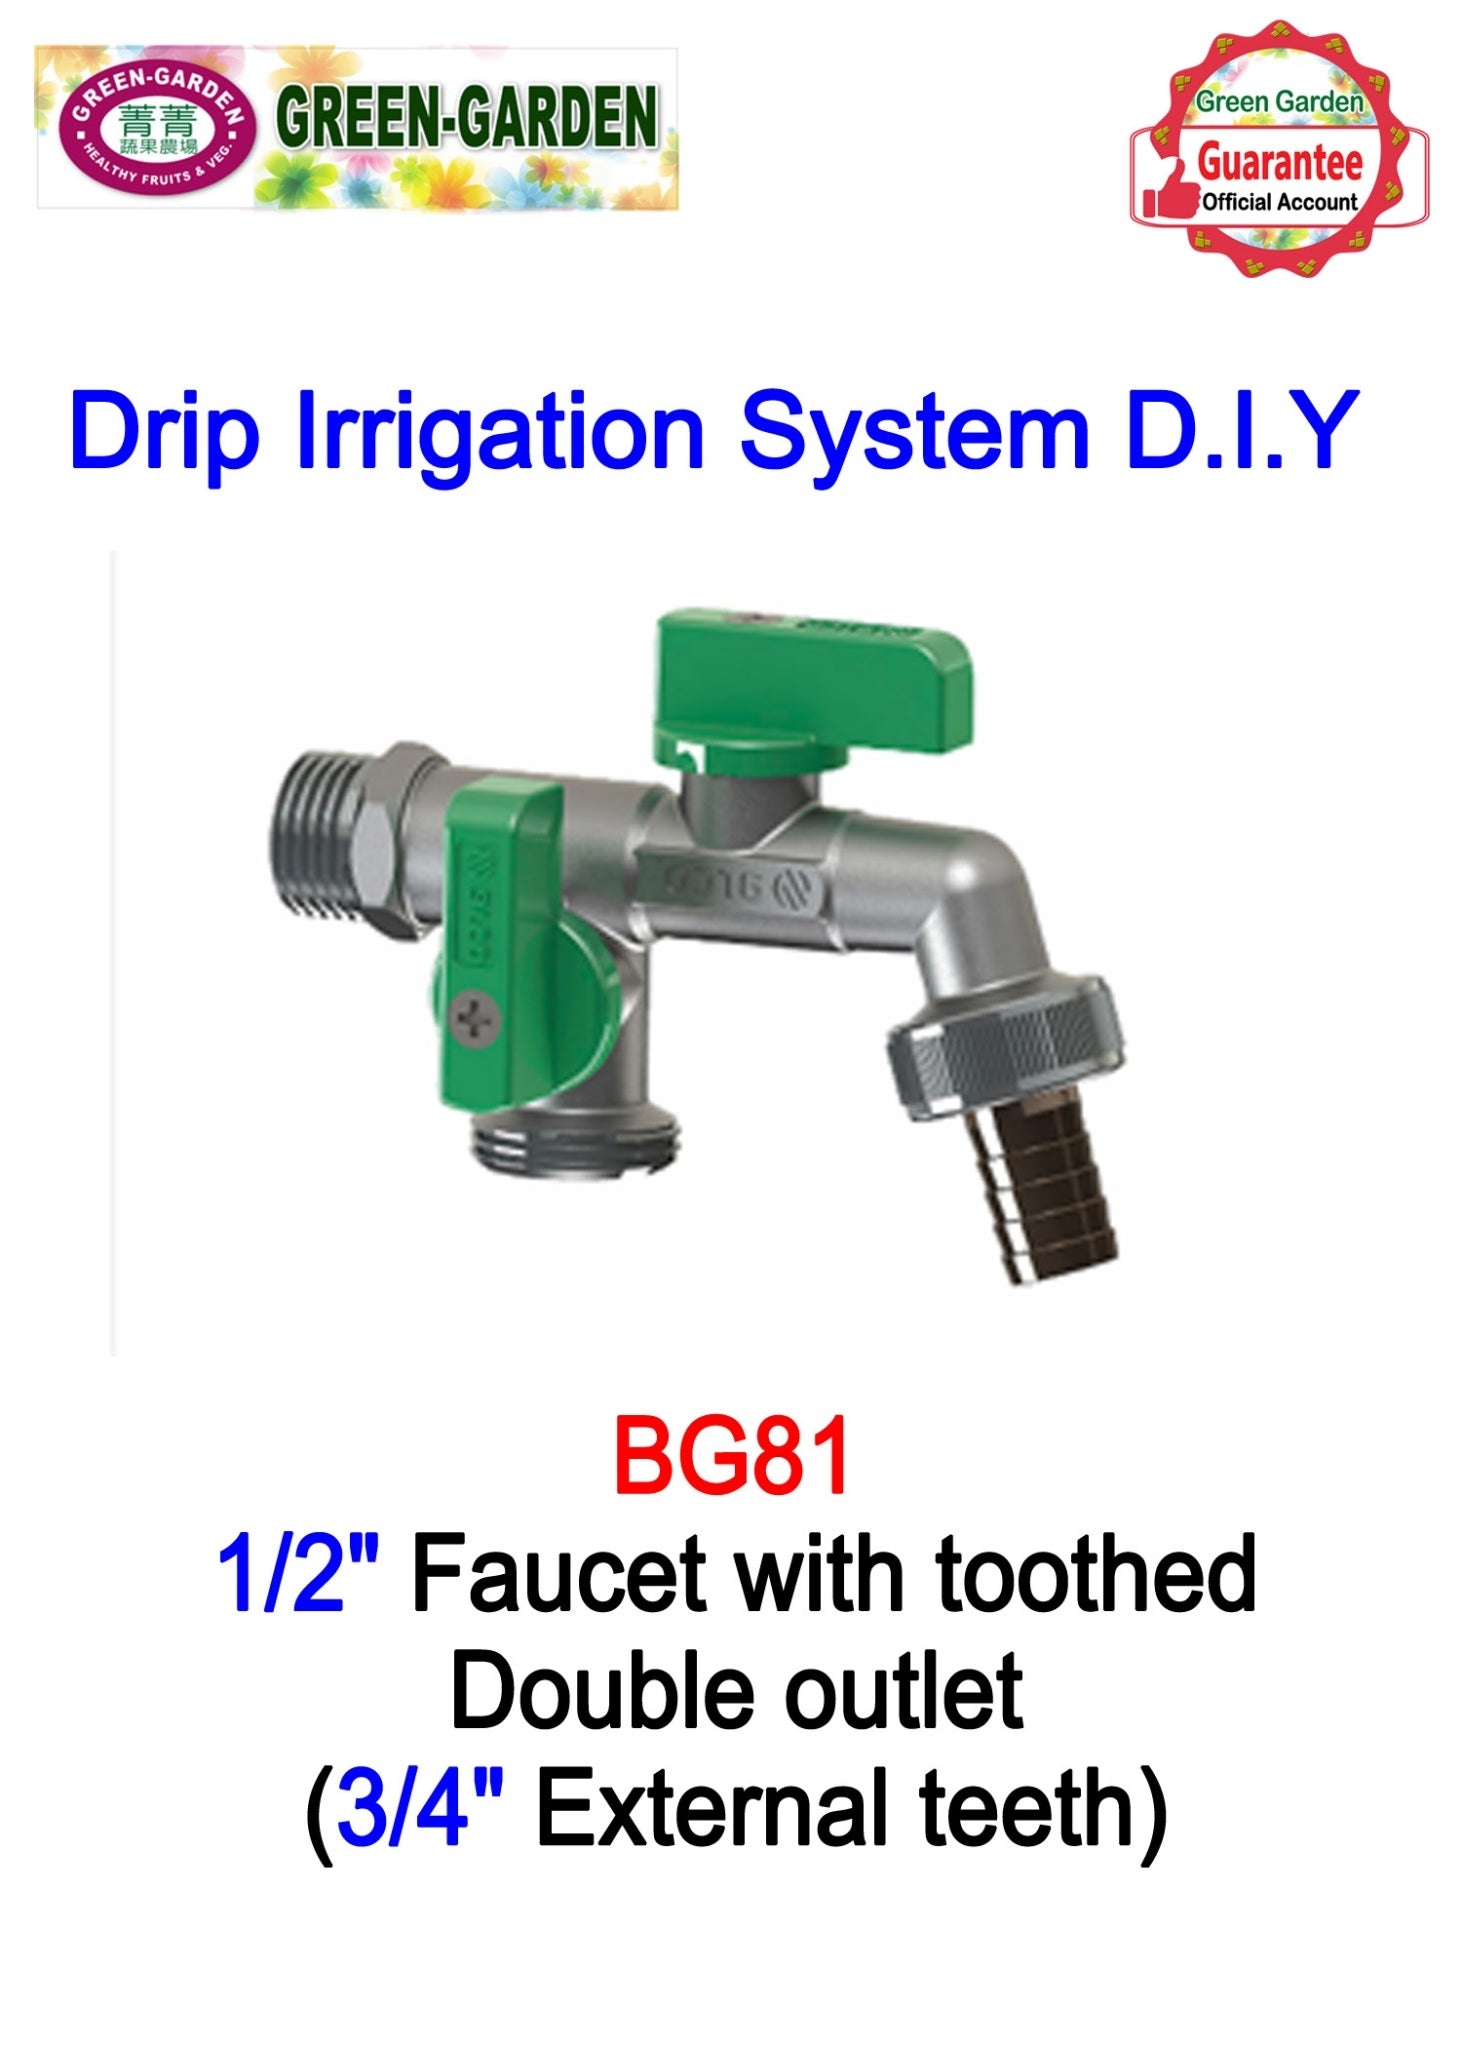 Drip Irrigation System - 1/2" Faucet with teeth-Double outlet(3/4"External teeth) BG81